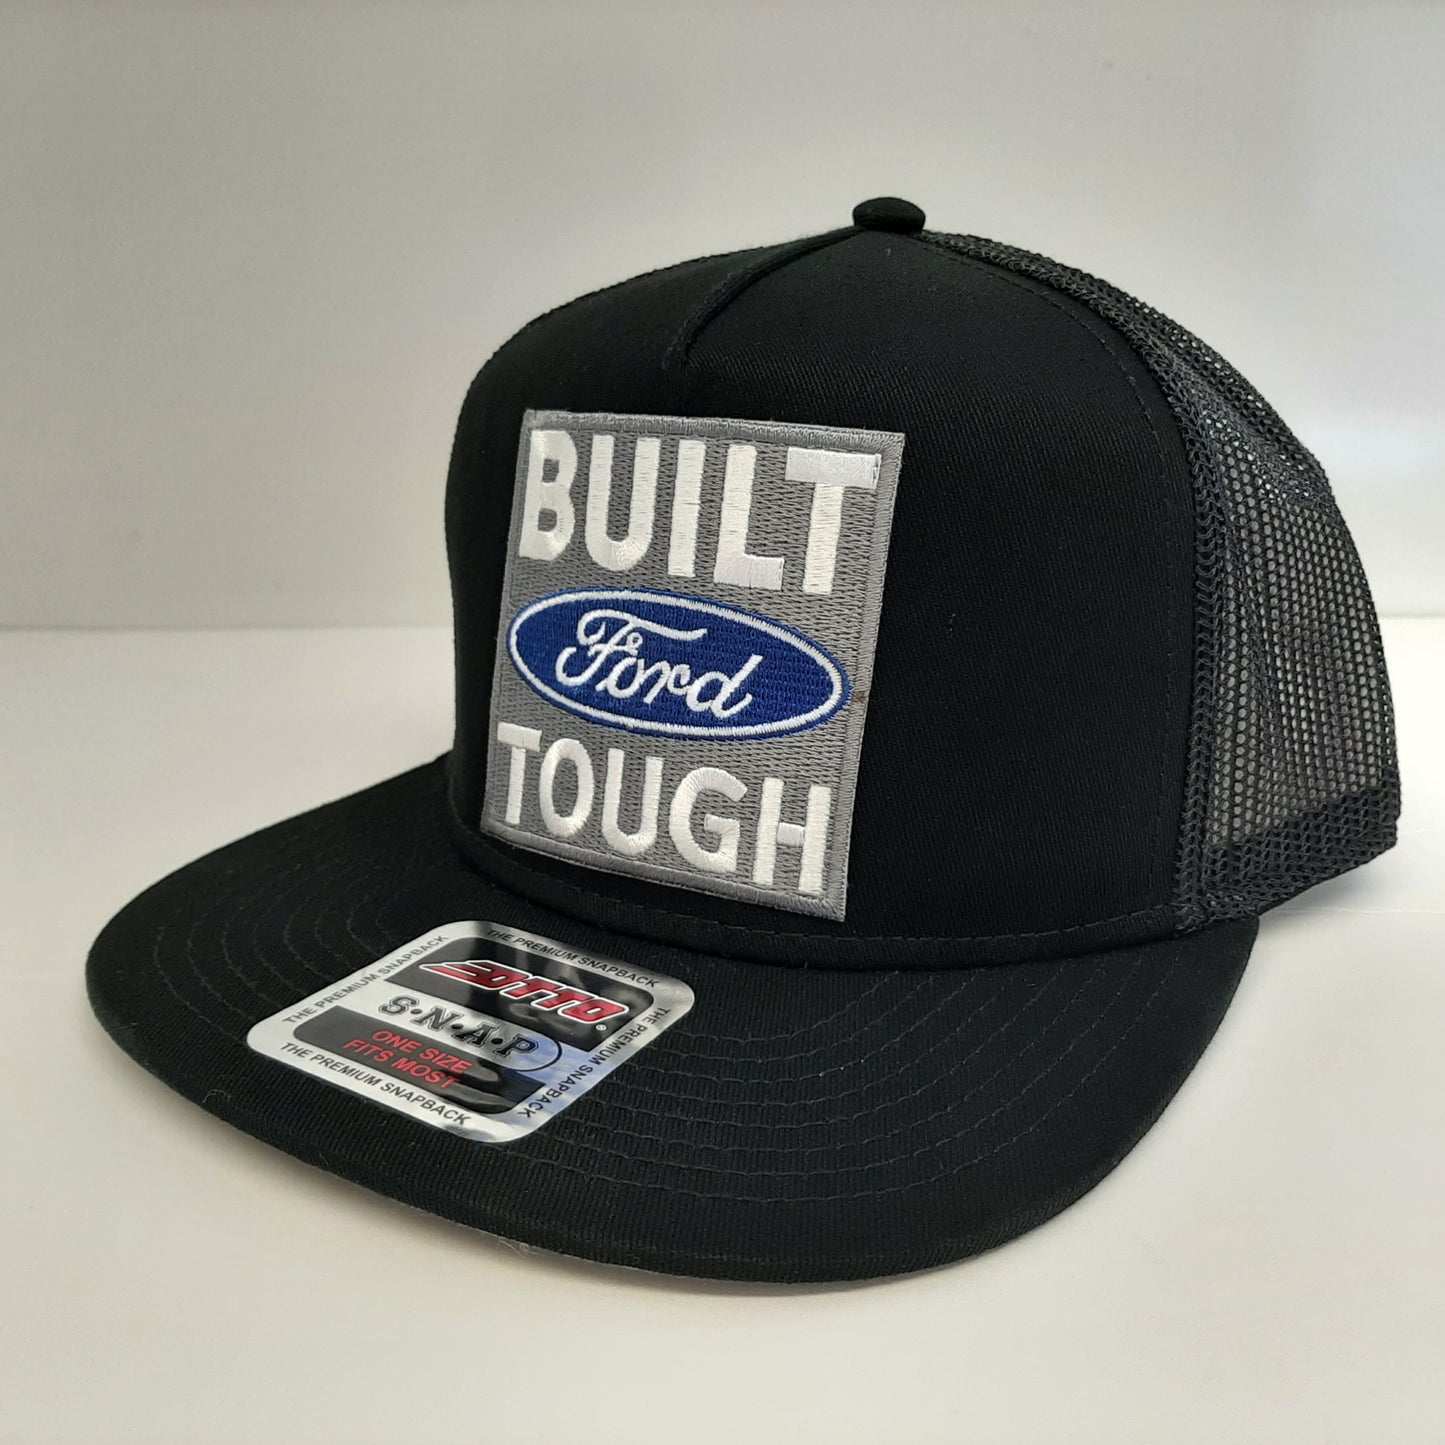 Built Ford Tough Embroidered Patch Flat Bill Snapback Mesh Hat Cap OTTO Black/Black